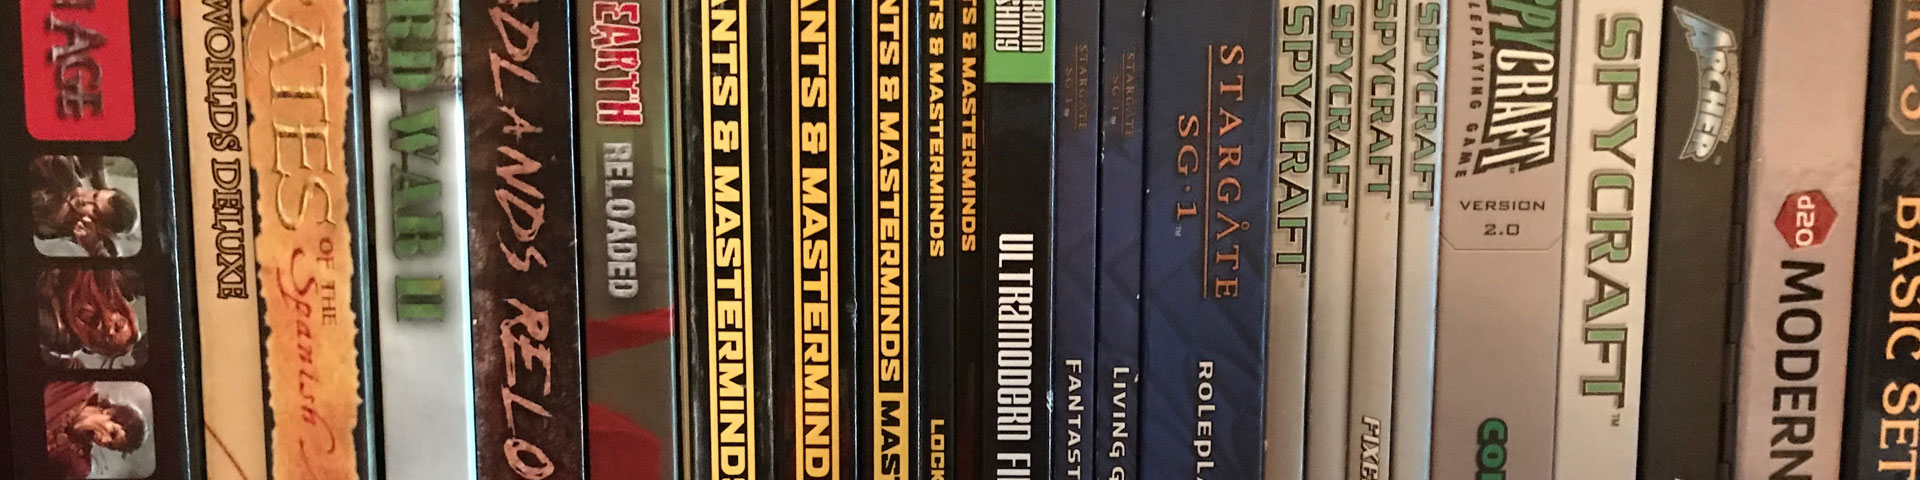 The spines of a dozen or so RPG books.